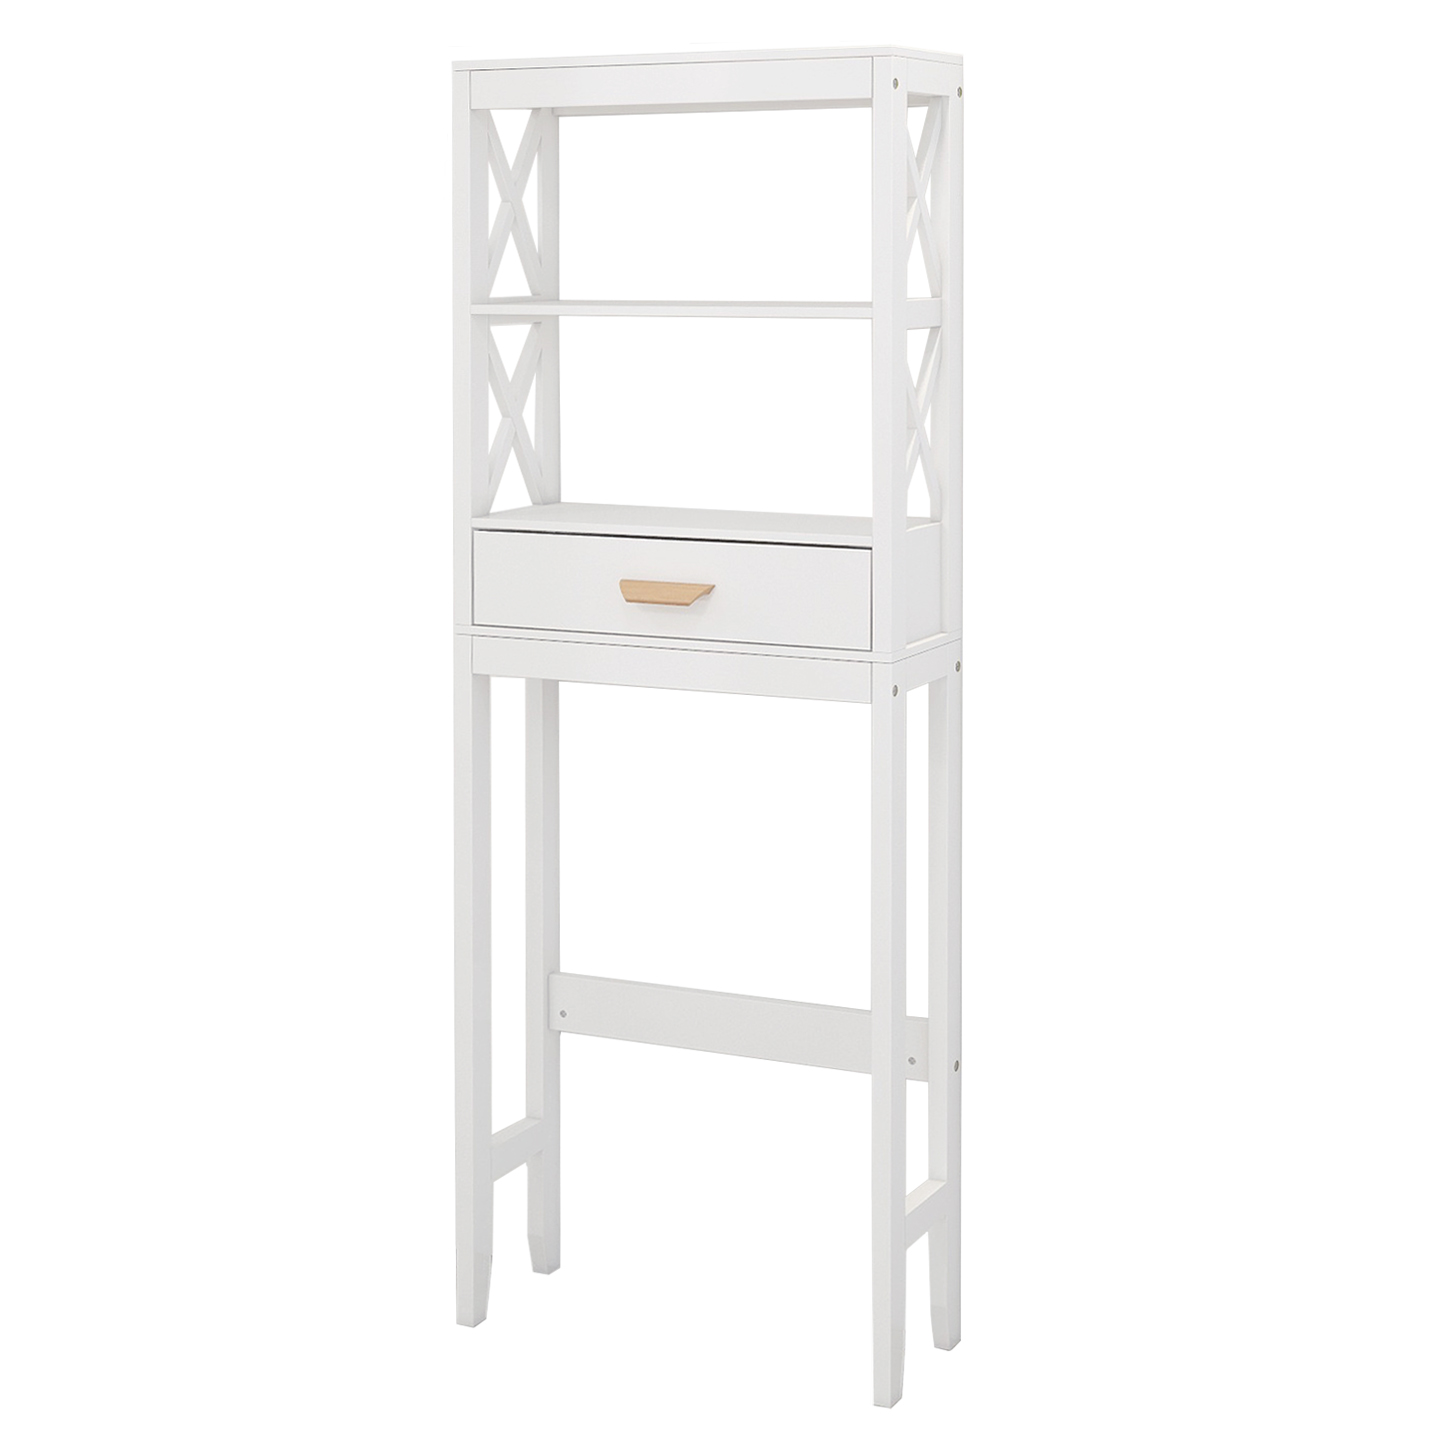 Over-the-Toilet Storage Cabinet White with one Drawer and 2 Shelves Space Saver Bathroom Rack-CASAINC